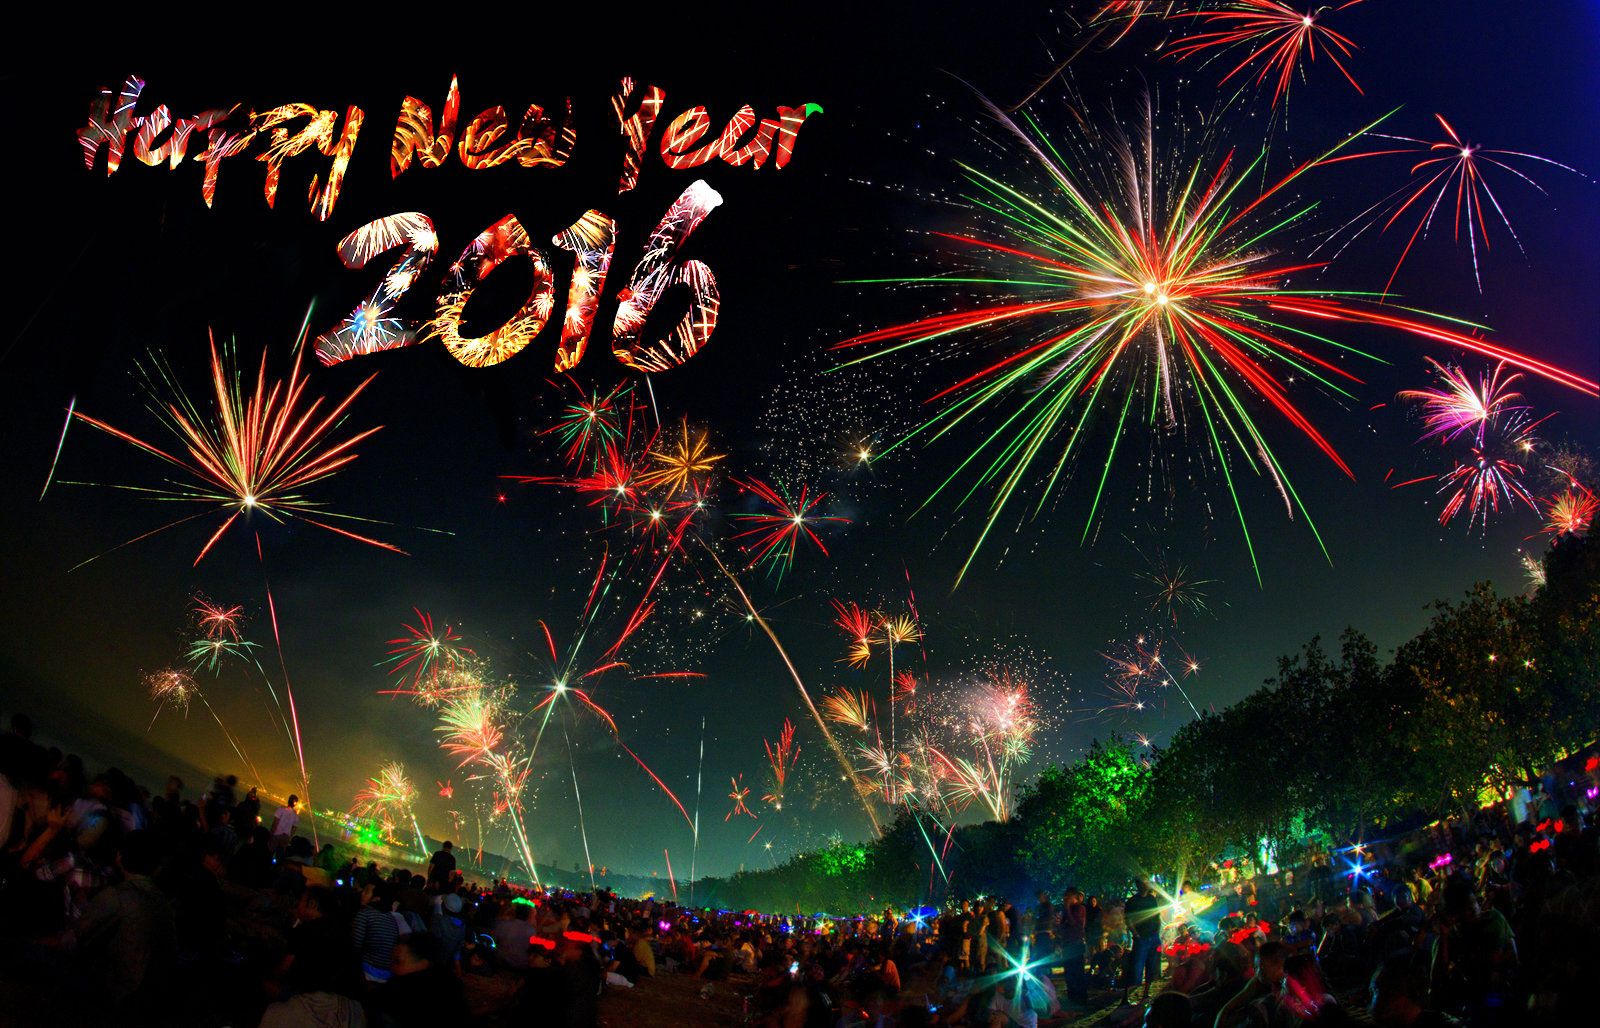 Happy New Year 2016 Wallpapers HD, Images & Facebook Cover photos